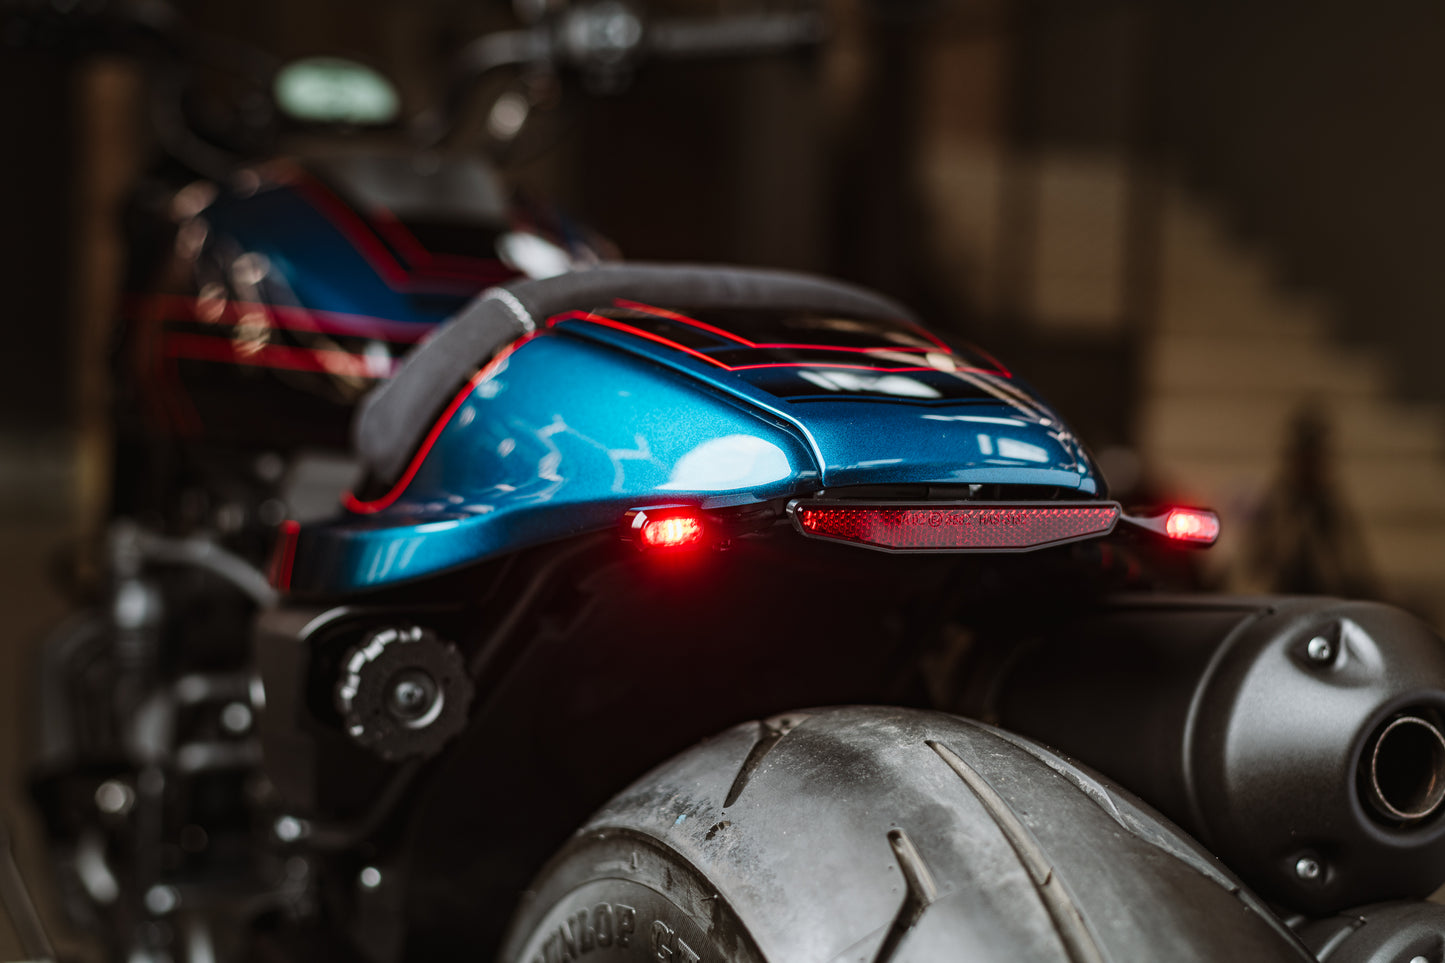 Zoomed Harley Davidson motorcycle with Killer Custom LED taillight/turn signal combo from the rear blurry background